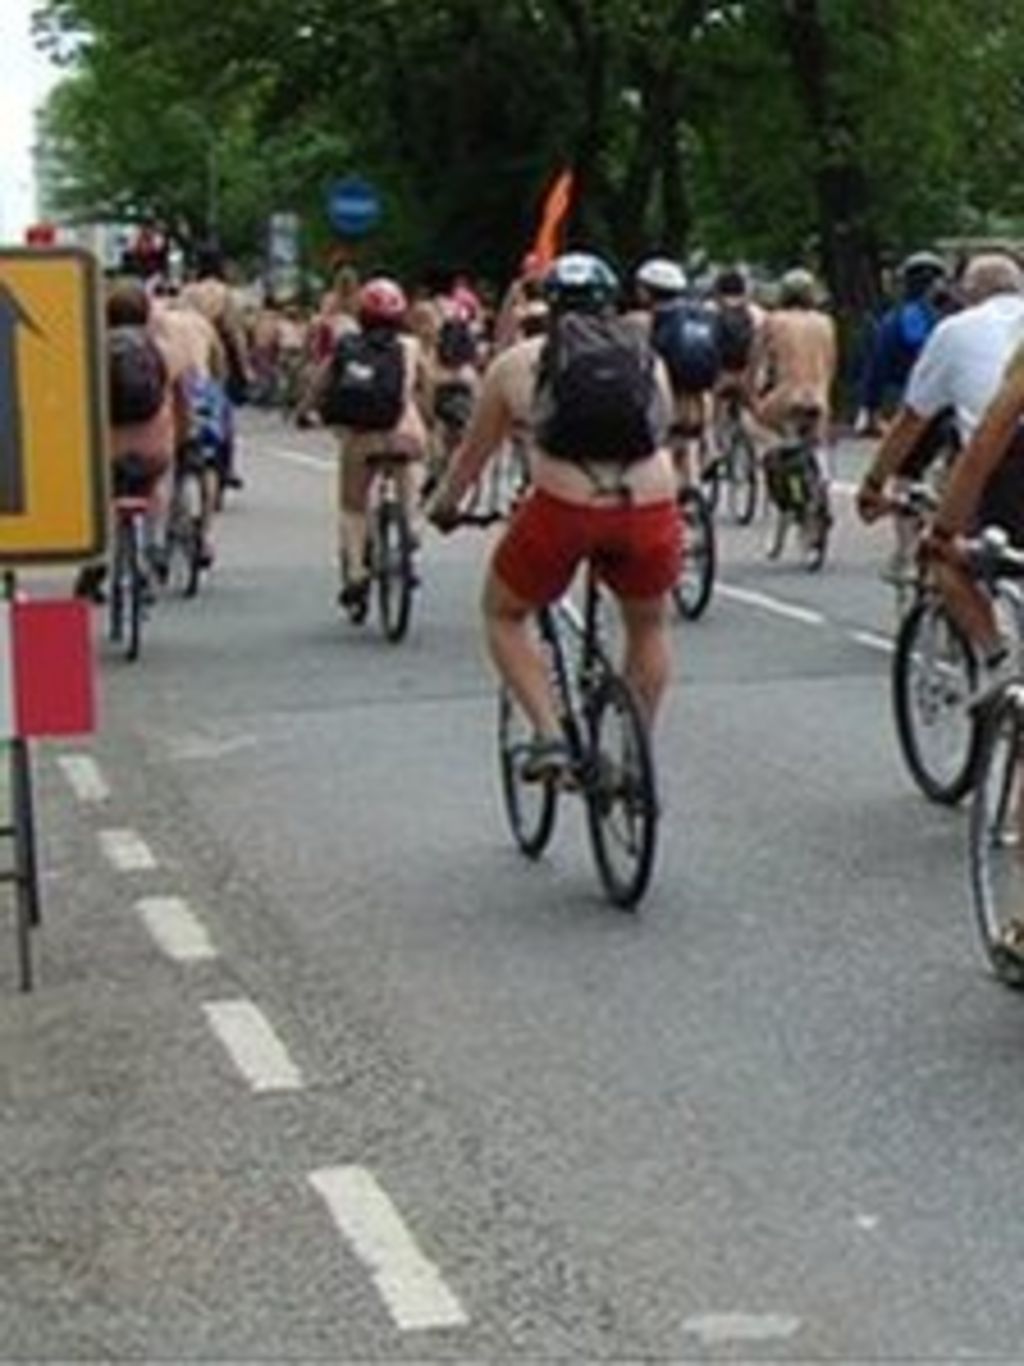 Brighton Nude Cyclists Ignore Police Advice To Cover Intimate Areas